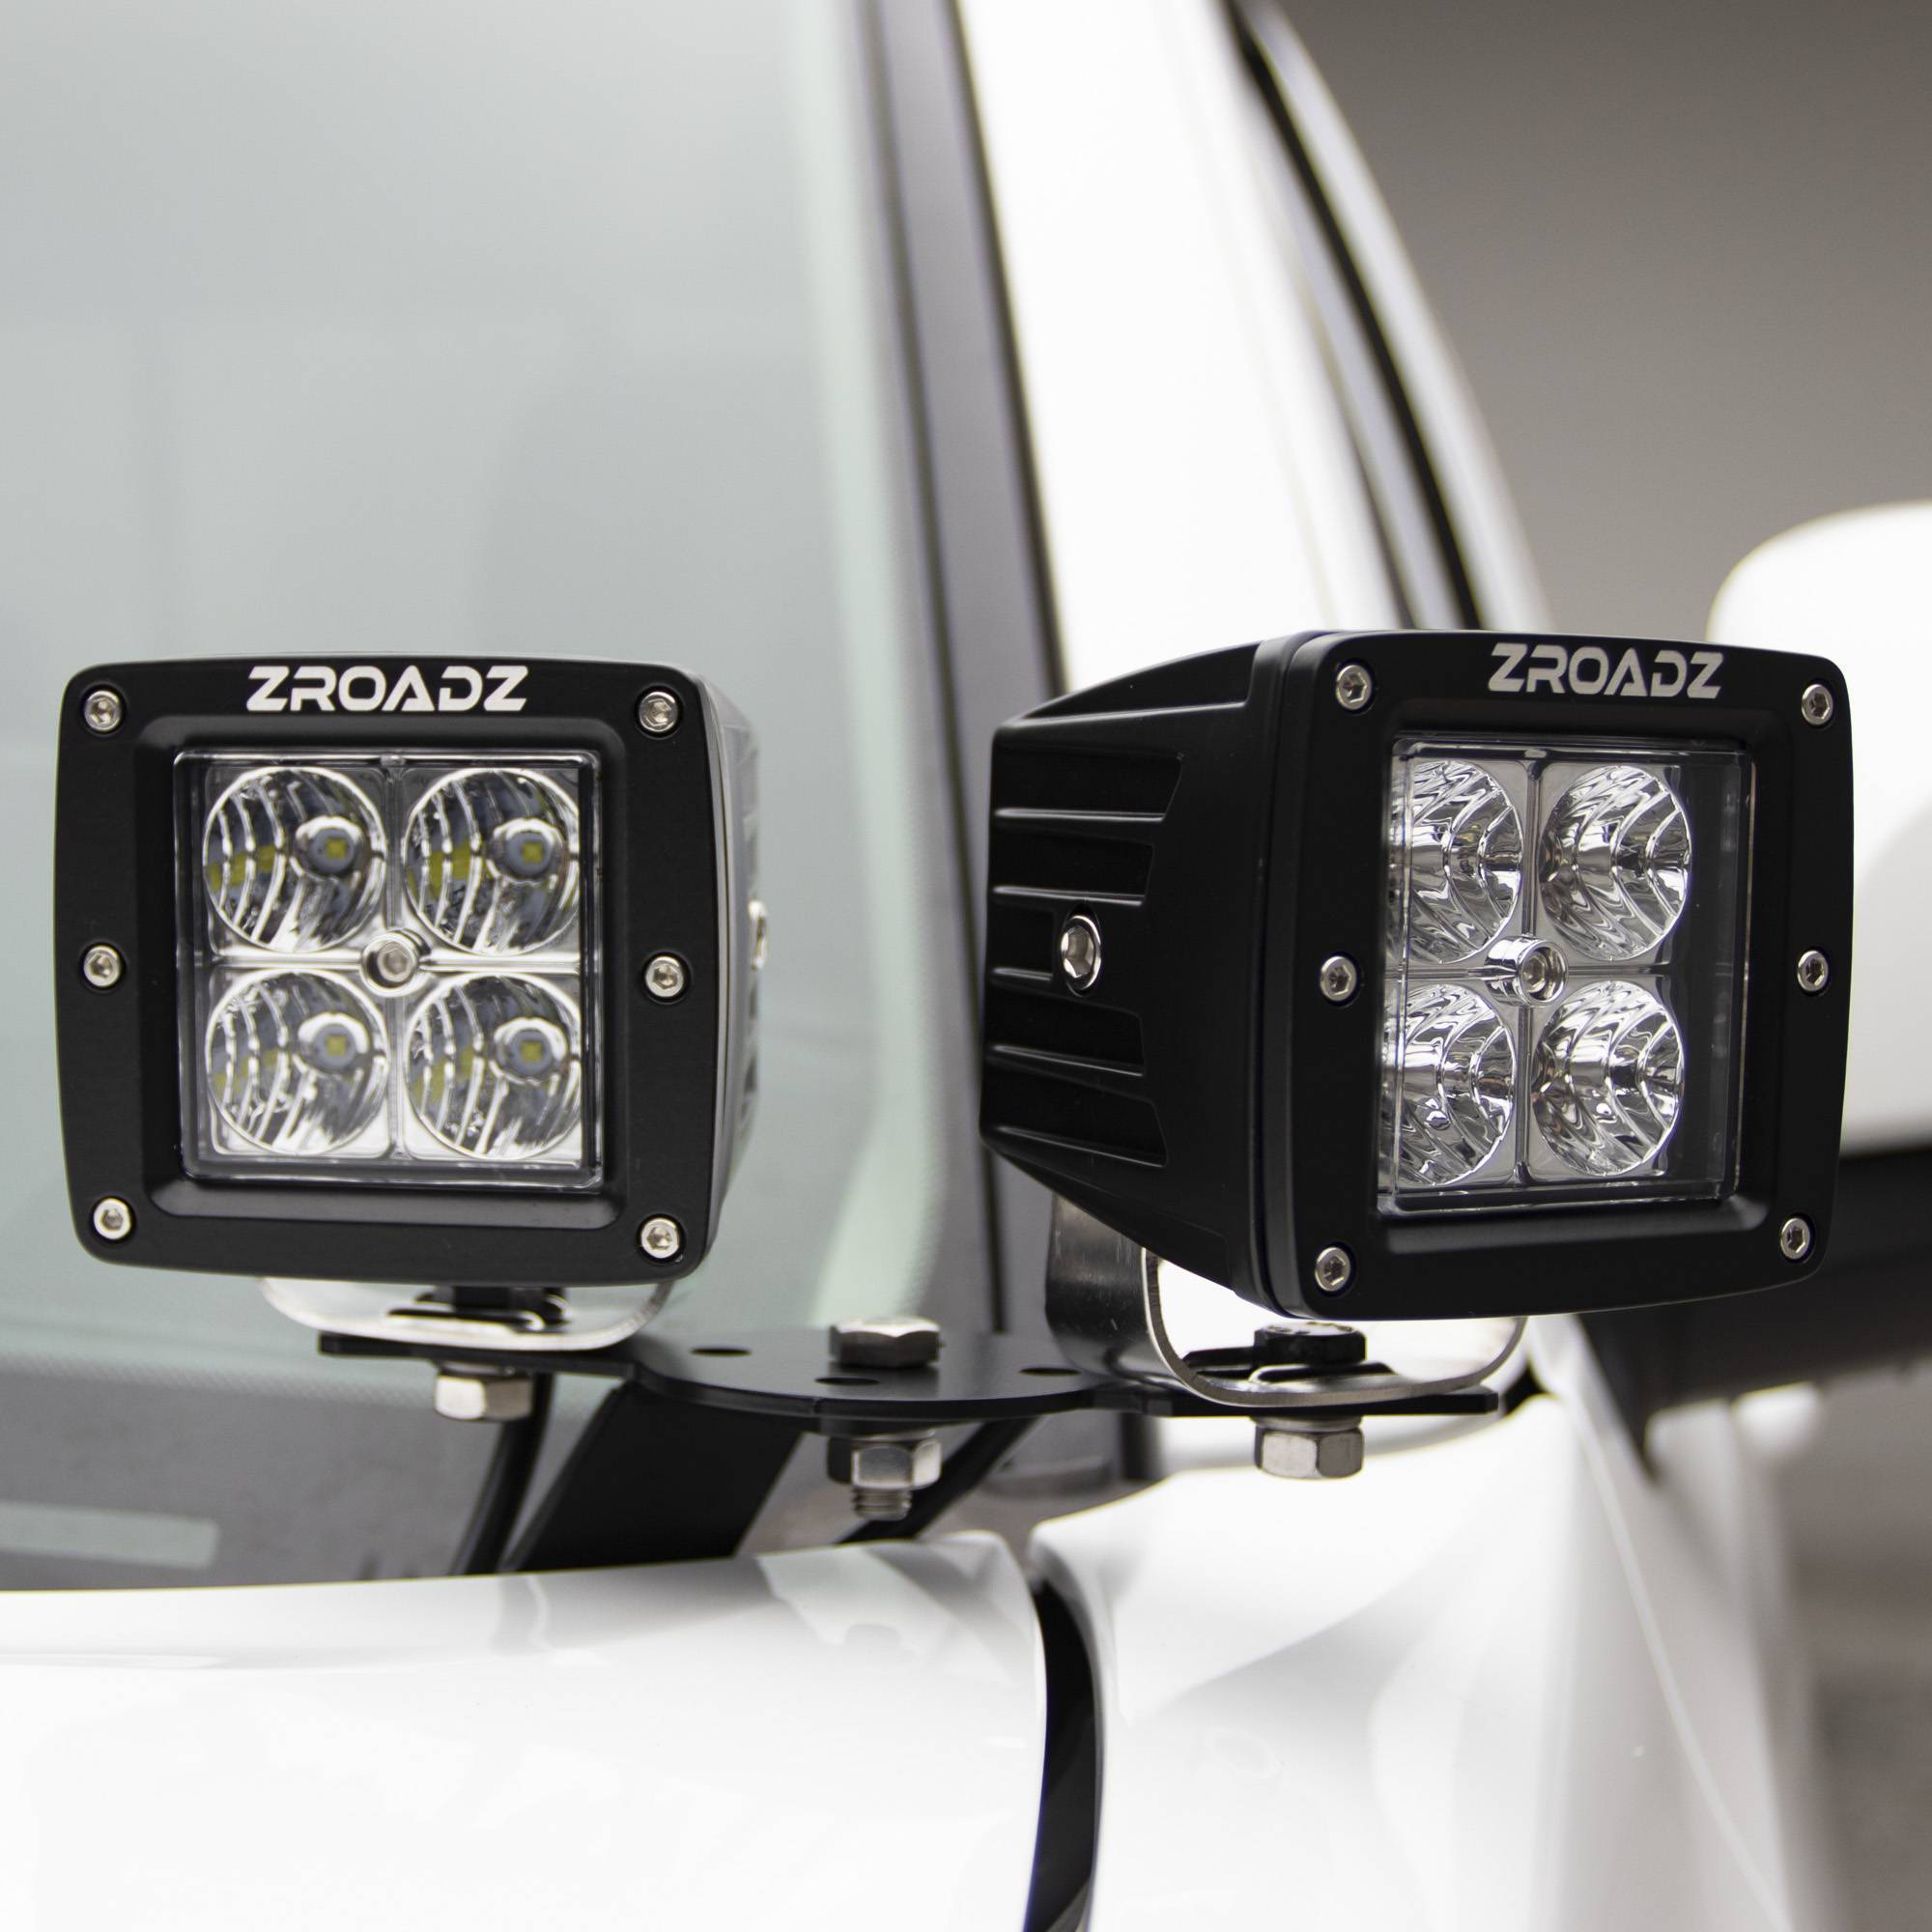 ZROADZ OFF ROAD PRODUCTS - 2014-2020 Toyota 4Runner Hood Hinge LED Kit with (4) 3 Inch LED Pod Lights - Part # Z369491-KIT4